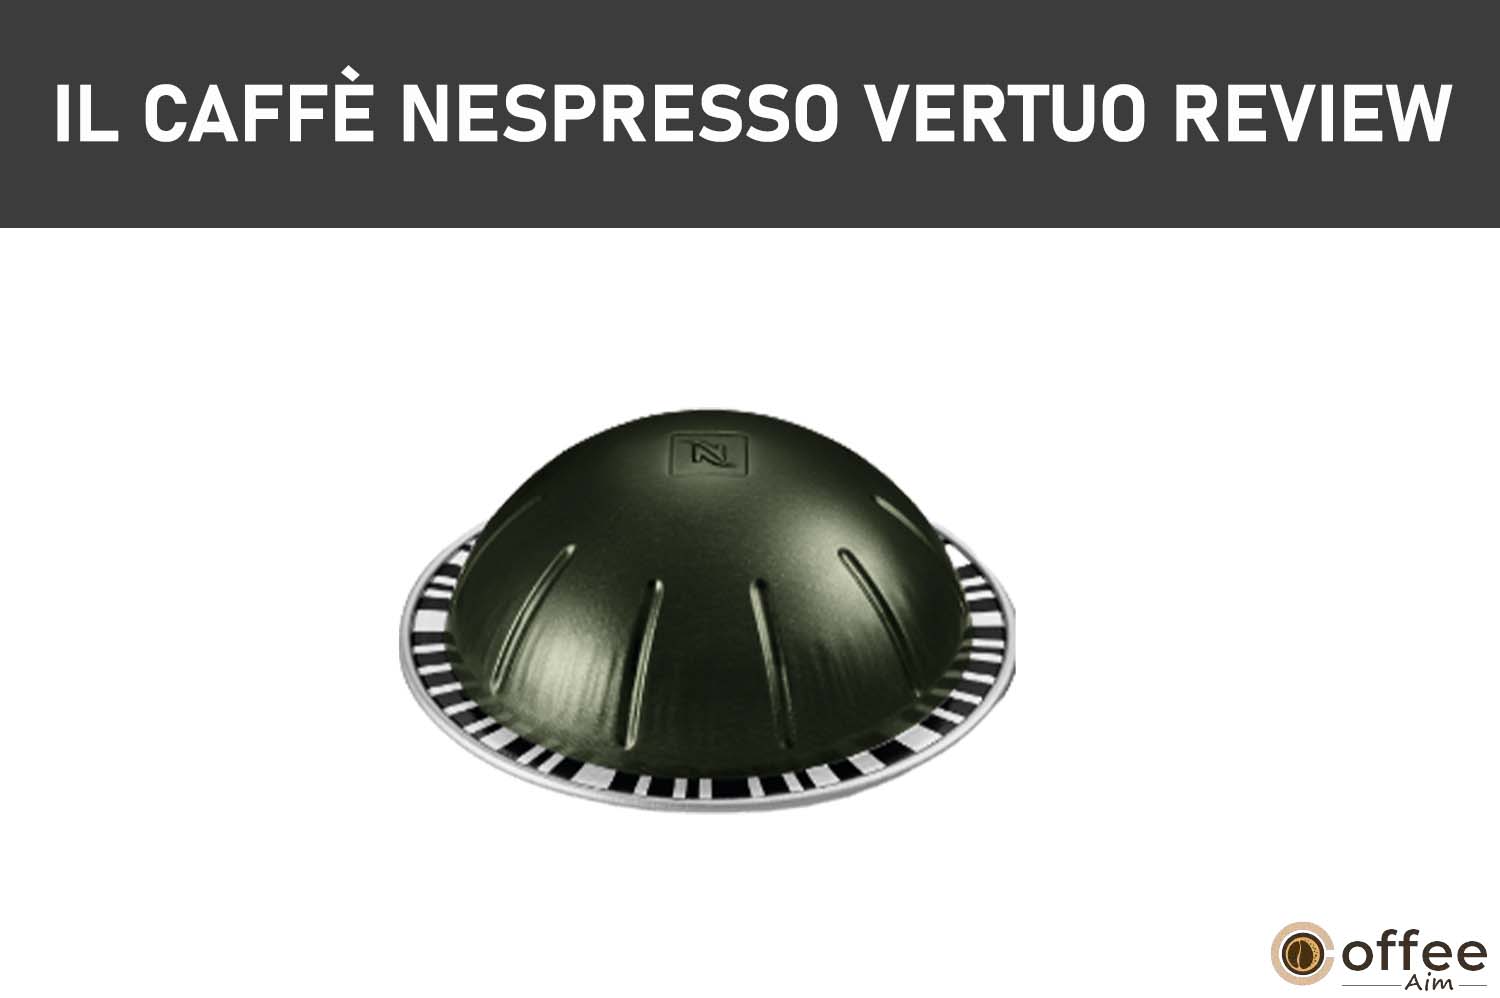 Featured image for the article "Il Caffè Nespresso Vertuo Review"